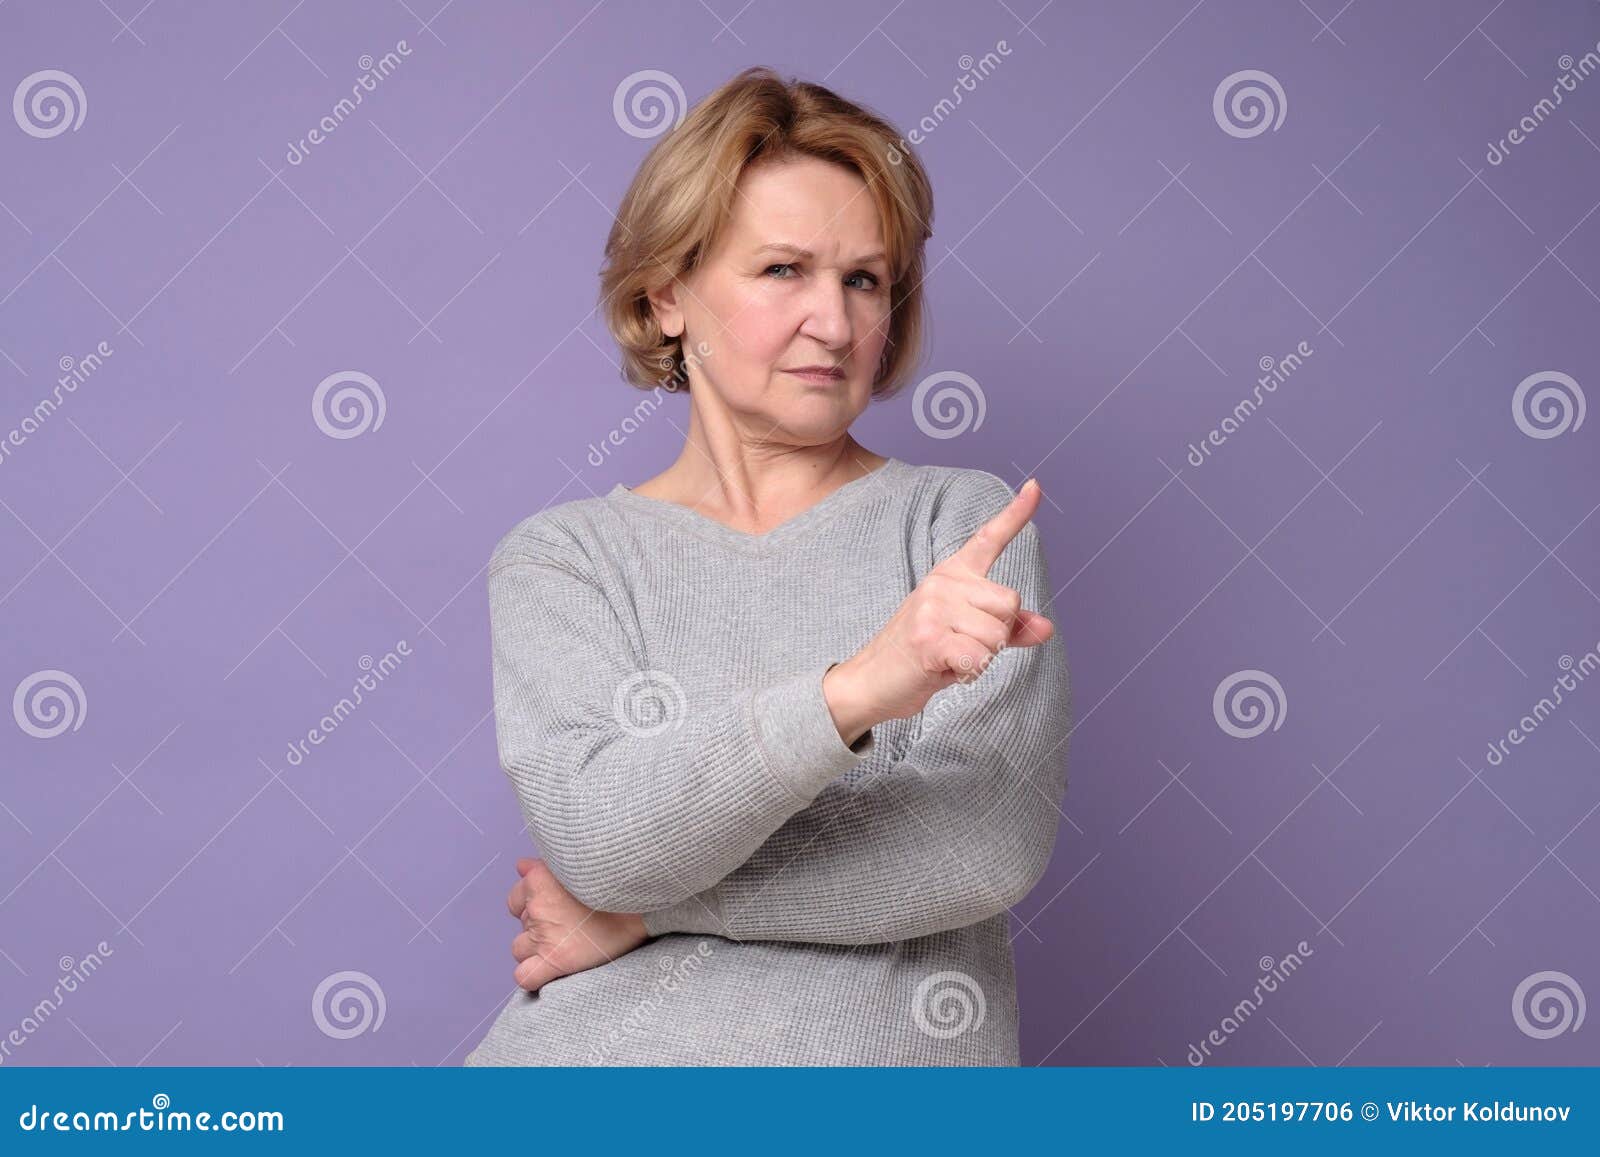 senior woman with rejection expression doing negative sign saying no.